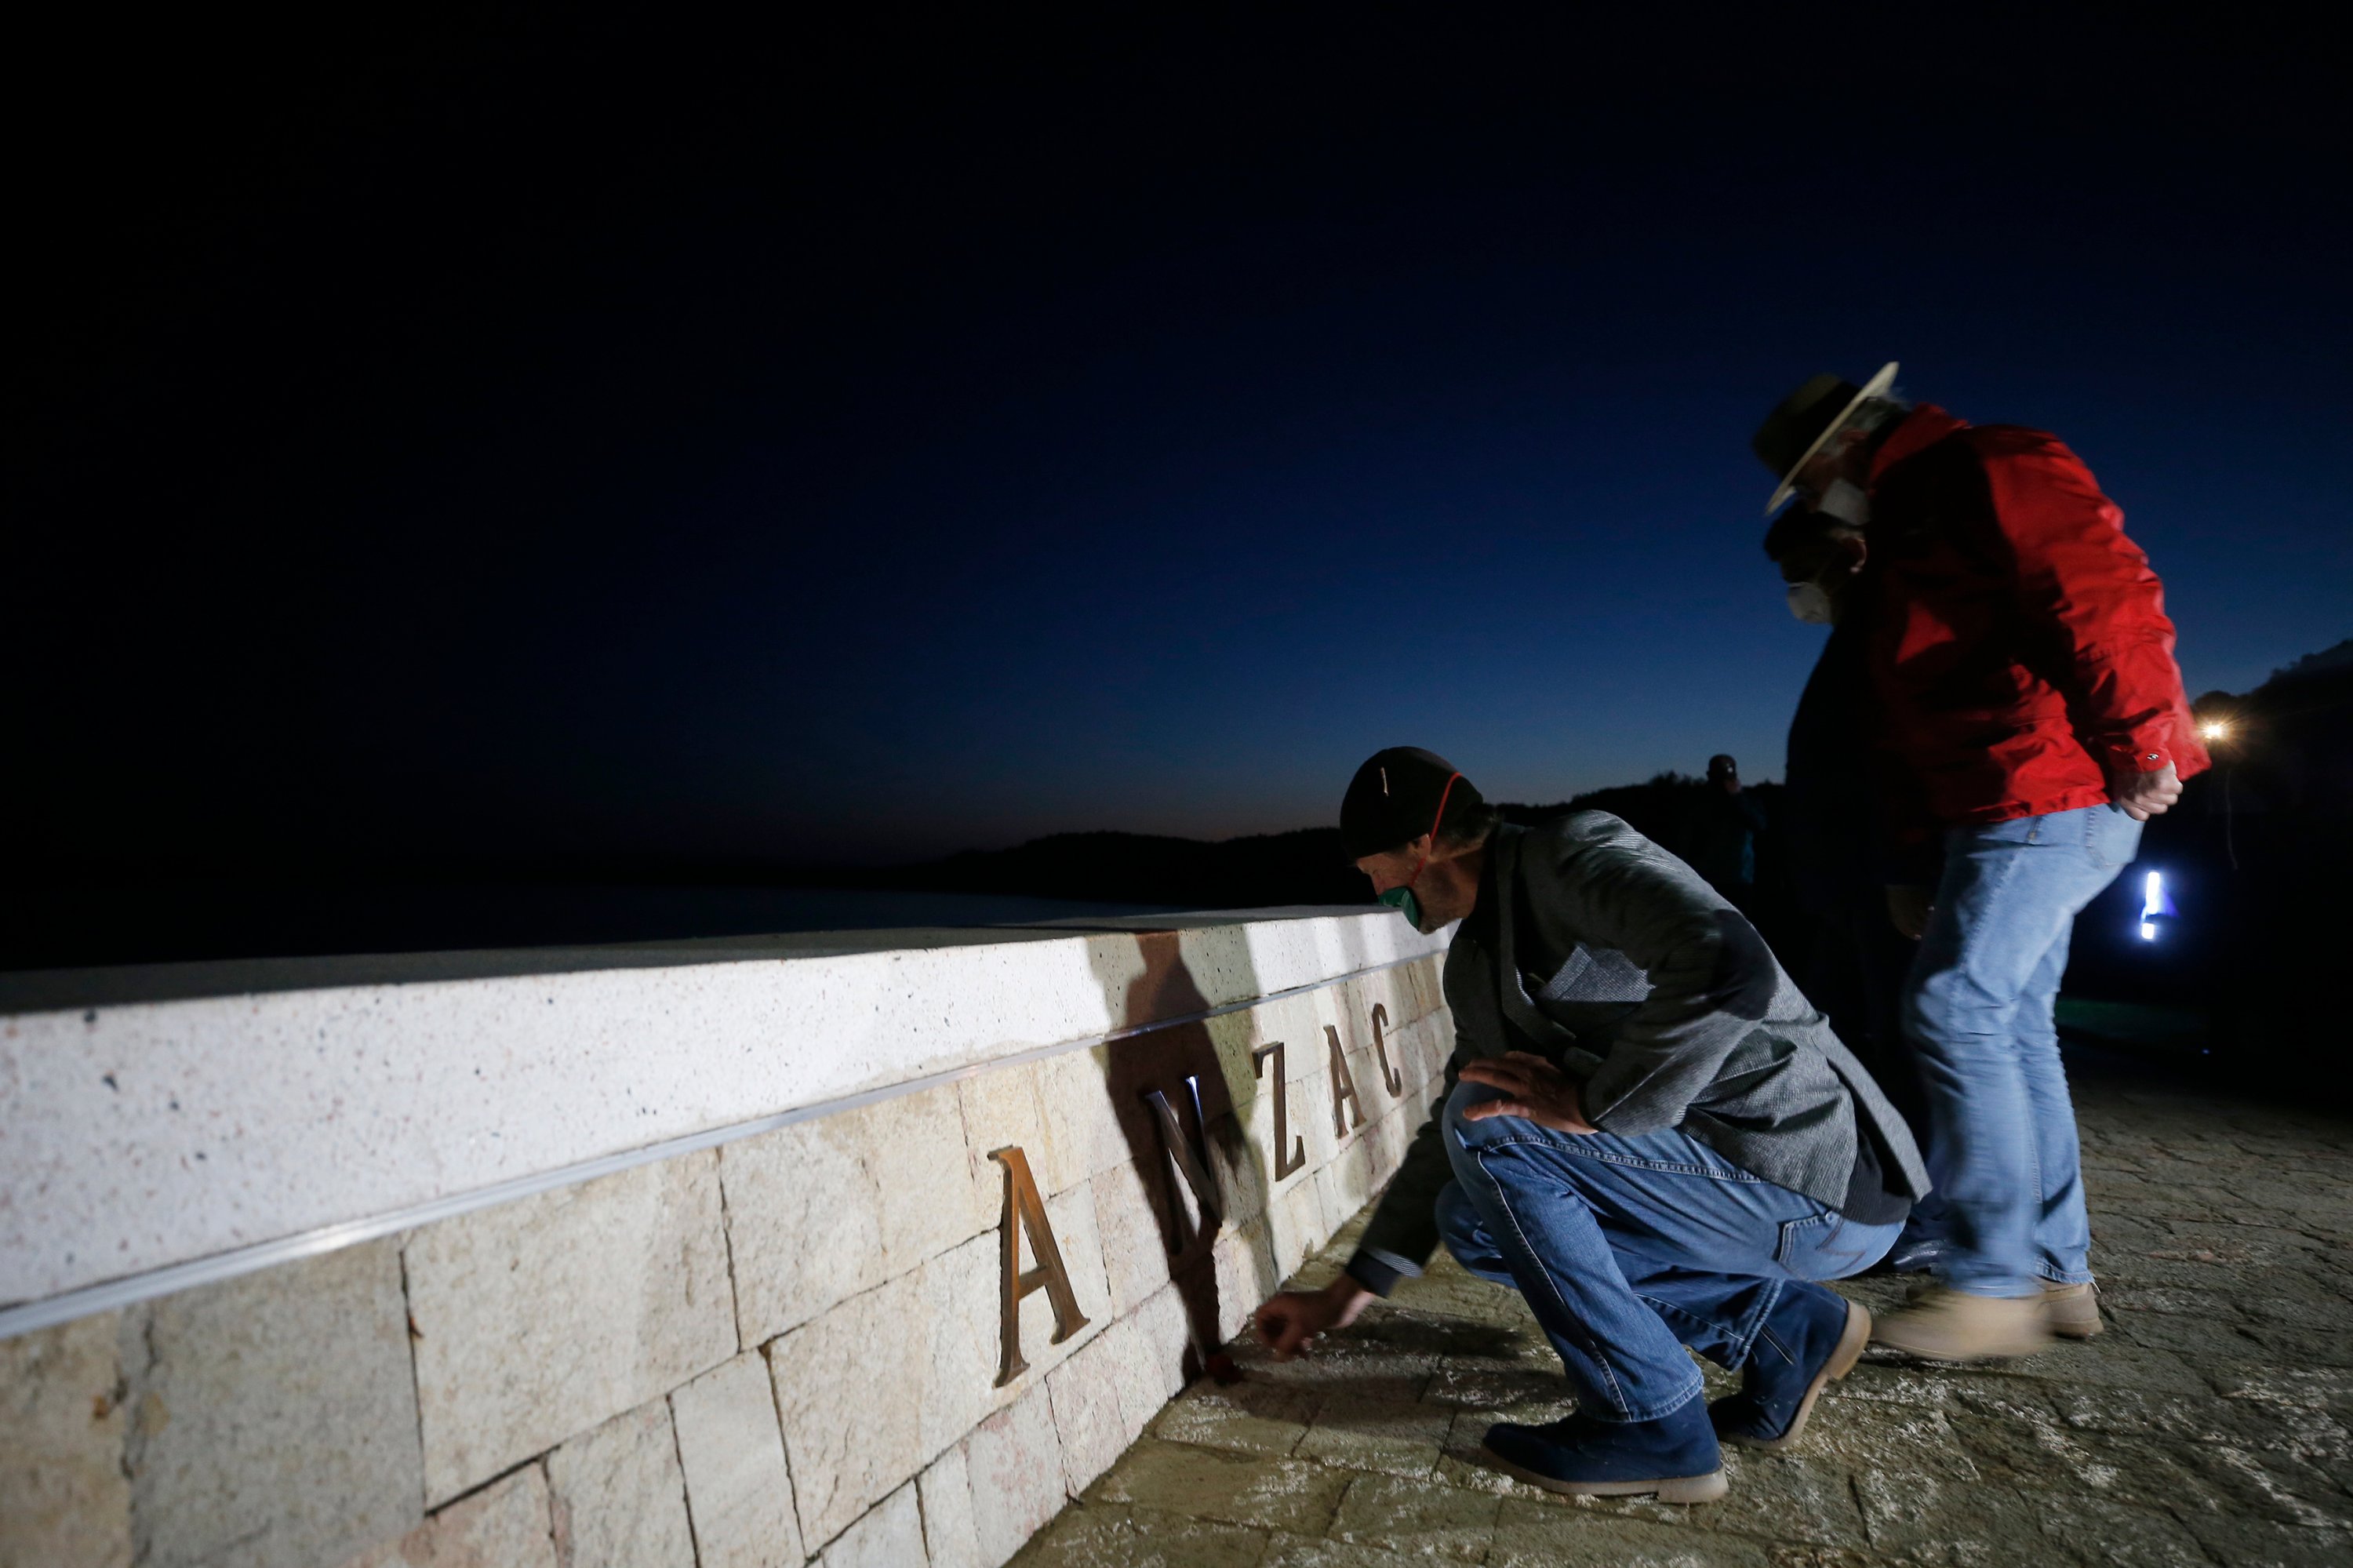 Employees of a local tourism company leave flowers at the Anzac Cove beach memorial. (AP Photo)